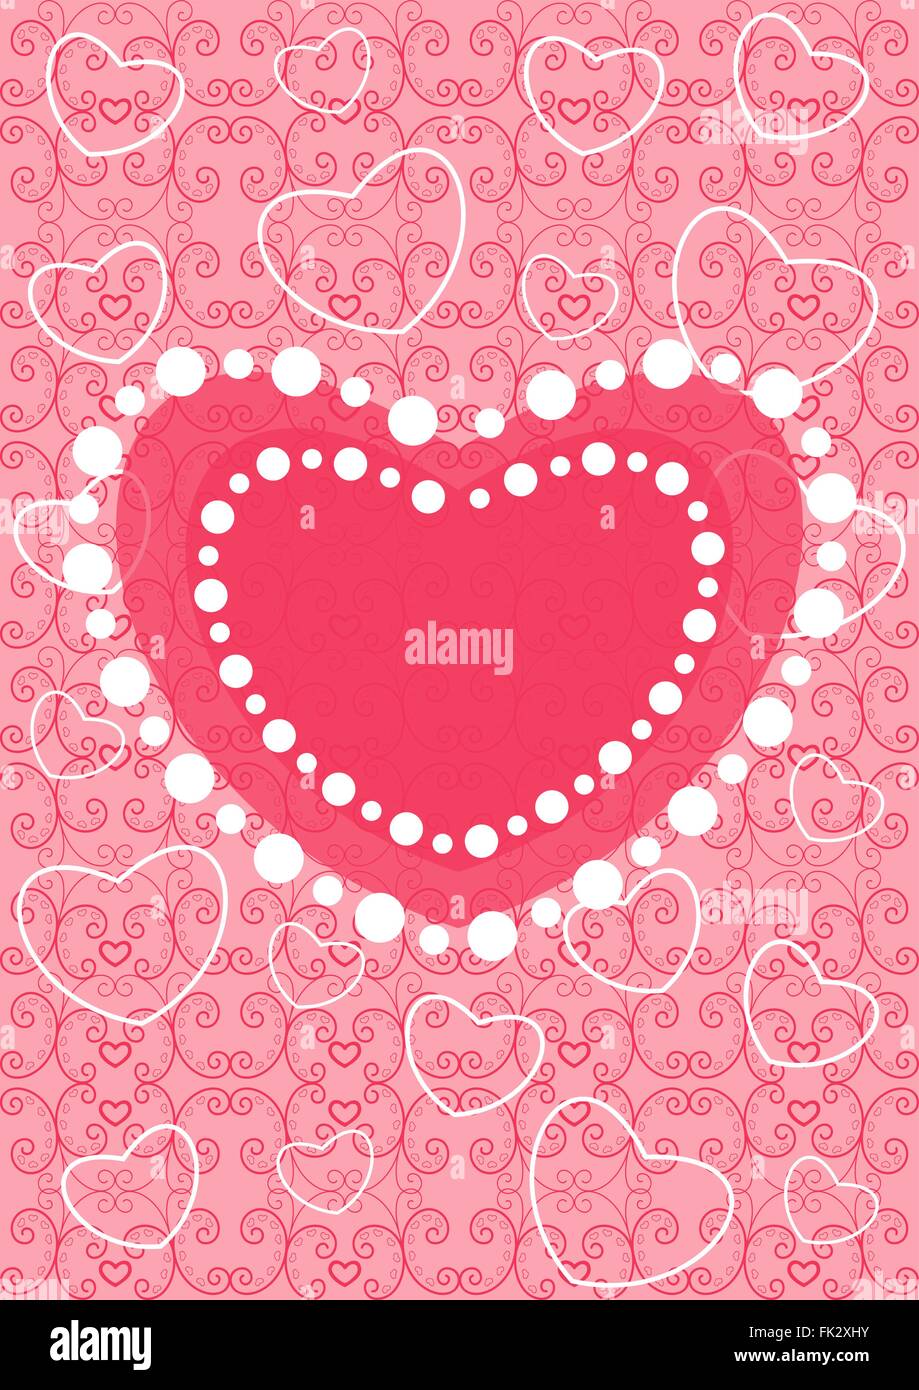 Happy valentines day cards with ornaments, hearts Stock Vector